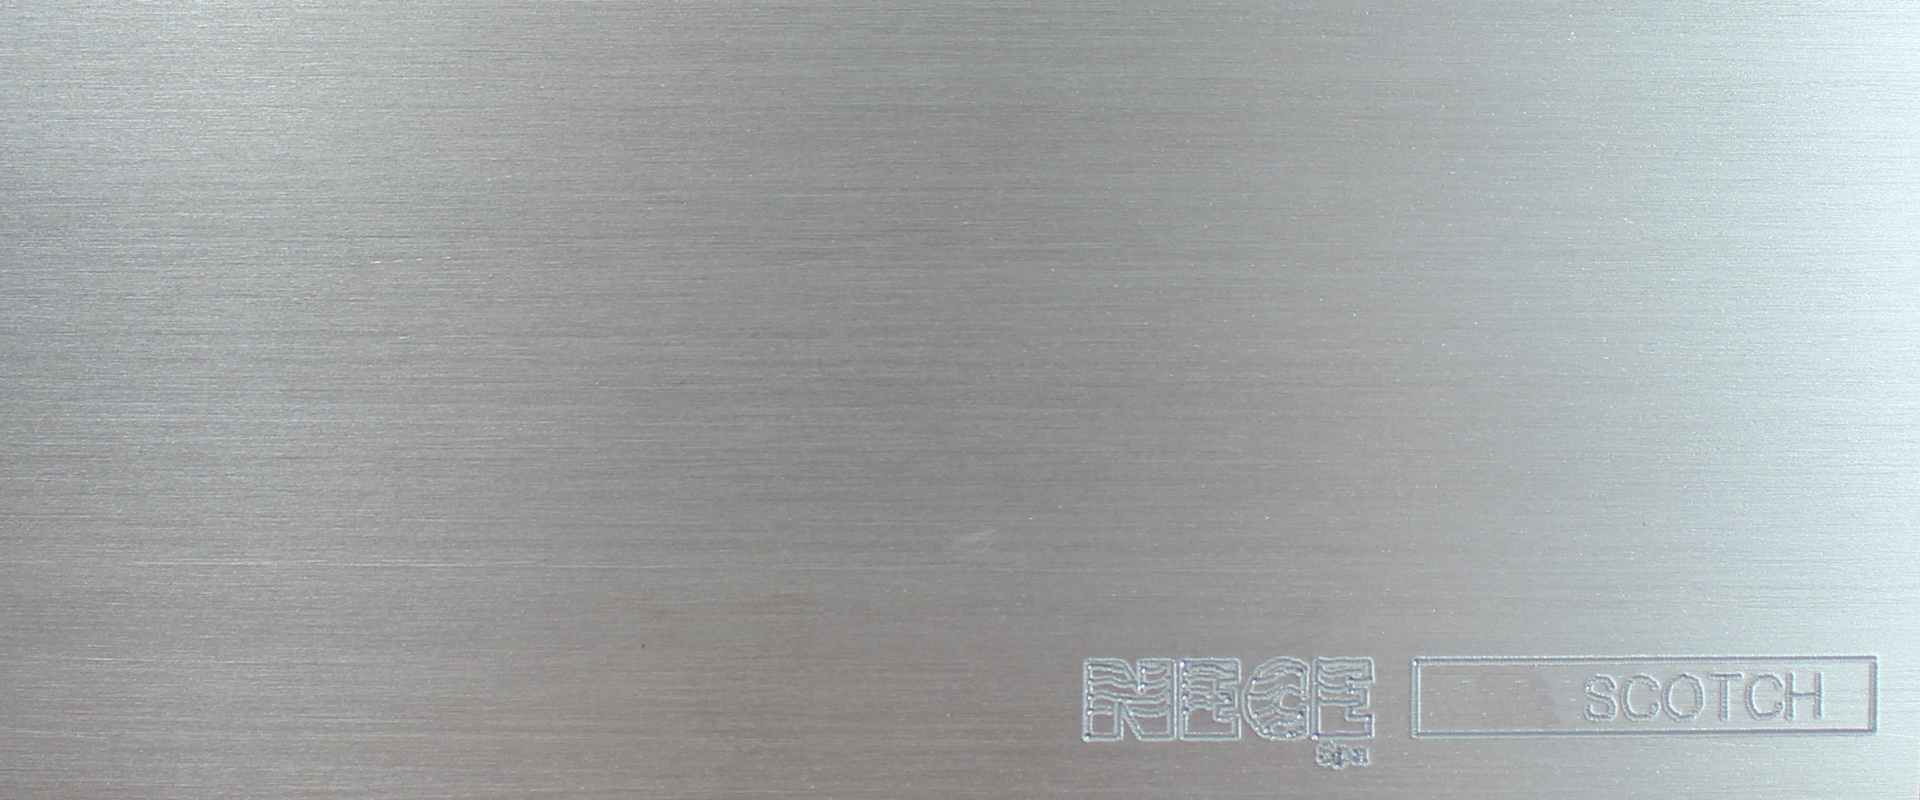 1500 x 4000 x 1,2 mm - Brushed only - NECE